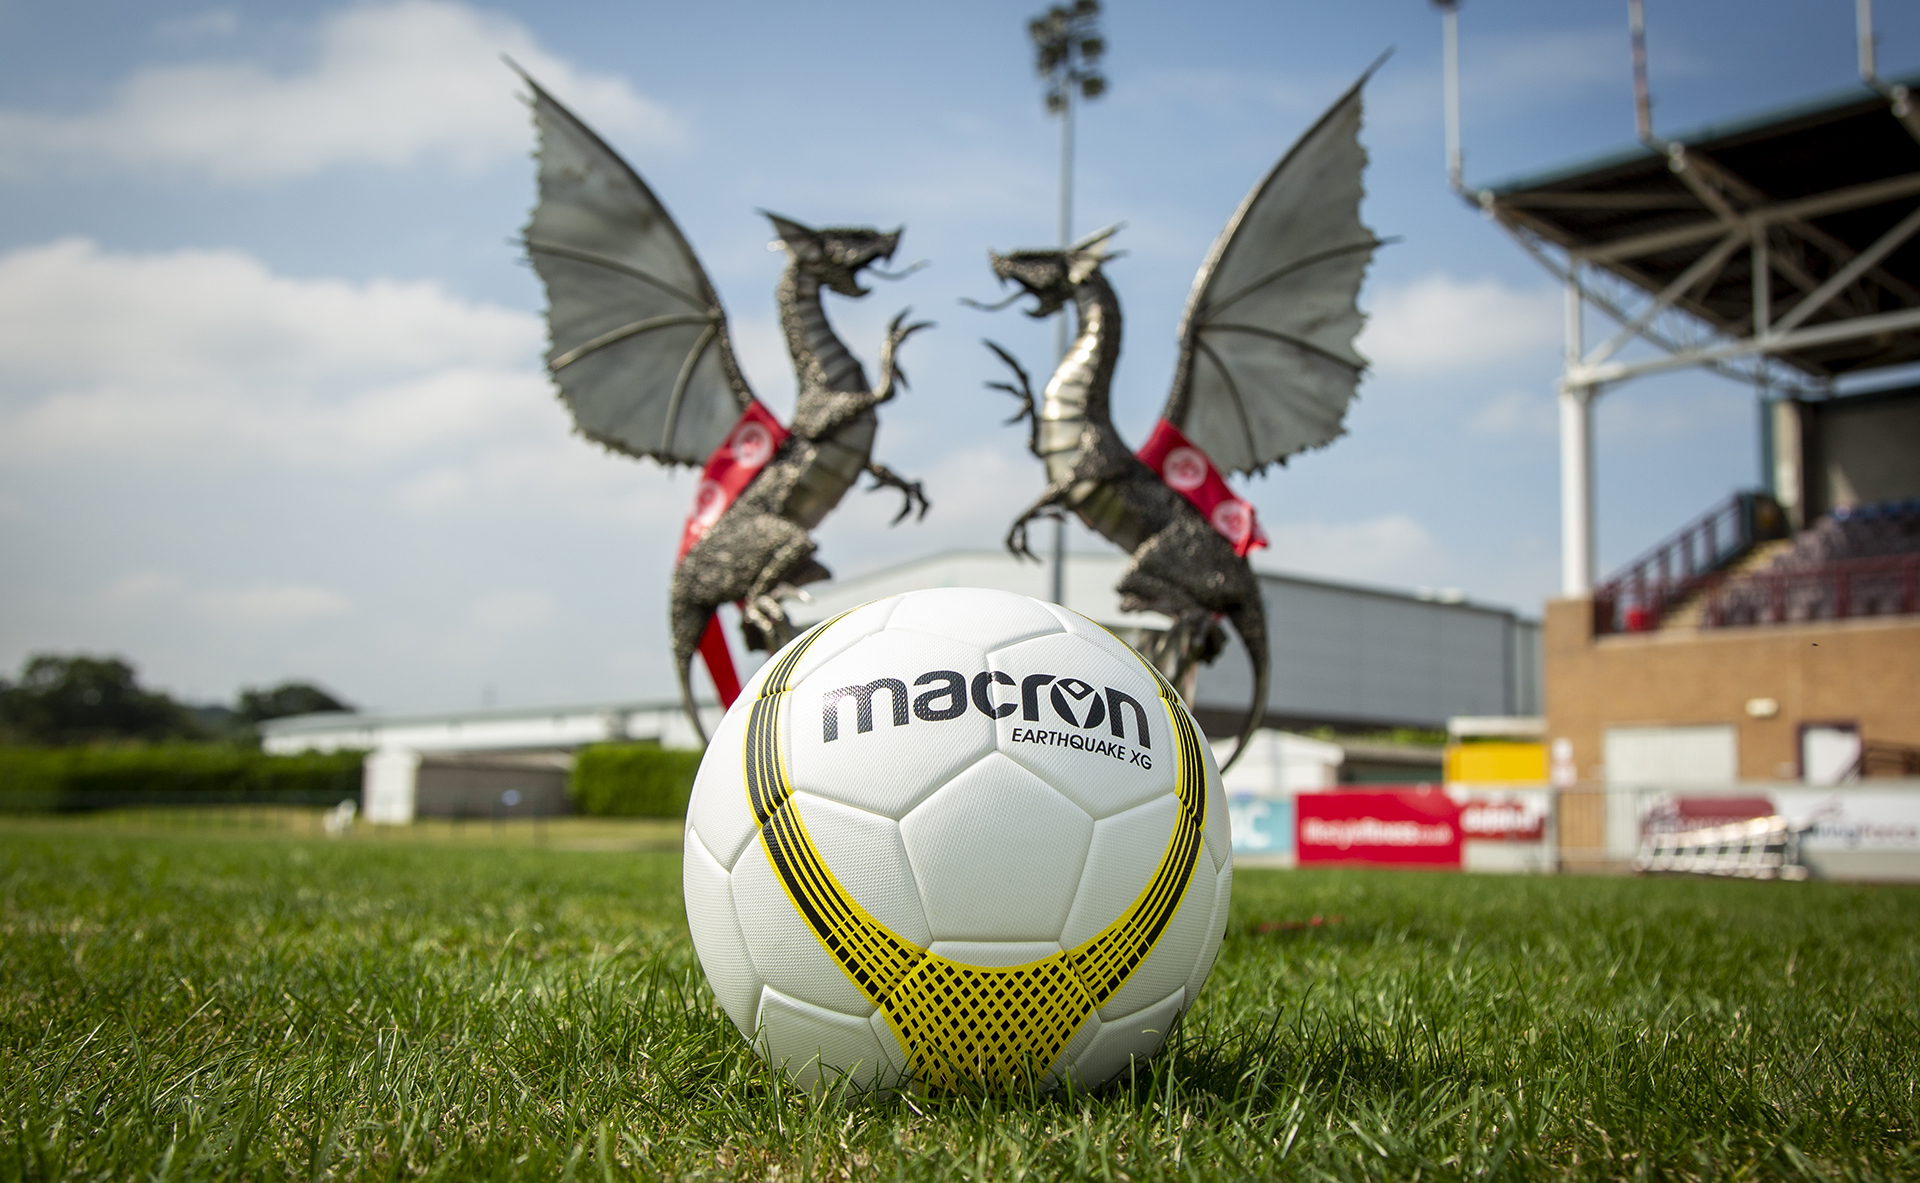 The new Macron ball for the 2020/21 season in front of the JD Cymru Premier title at Deeside Stadium | © NCM Media